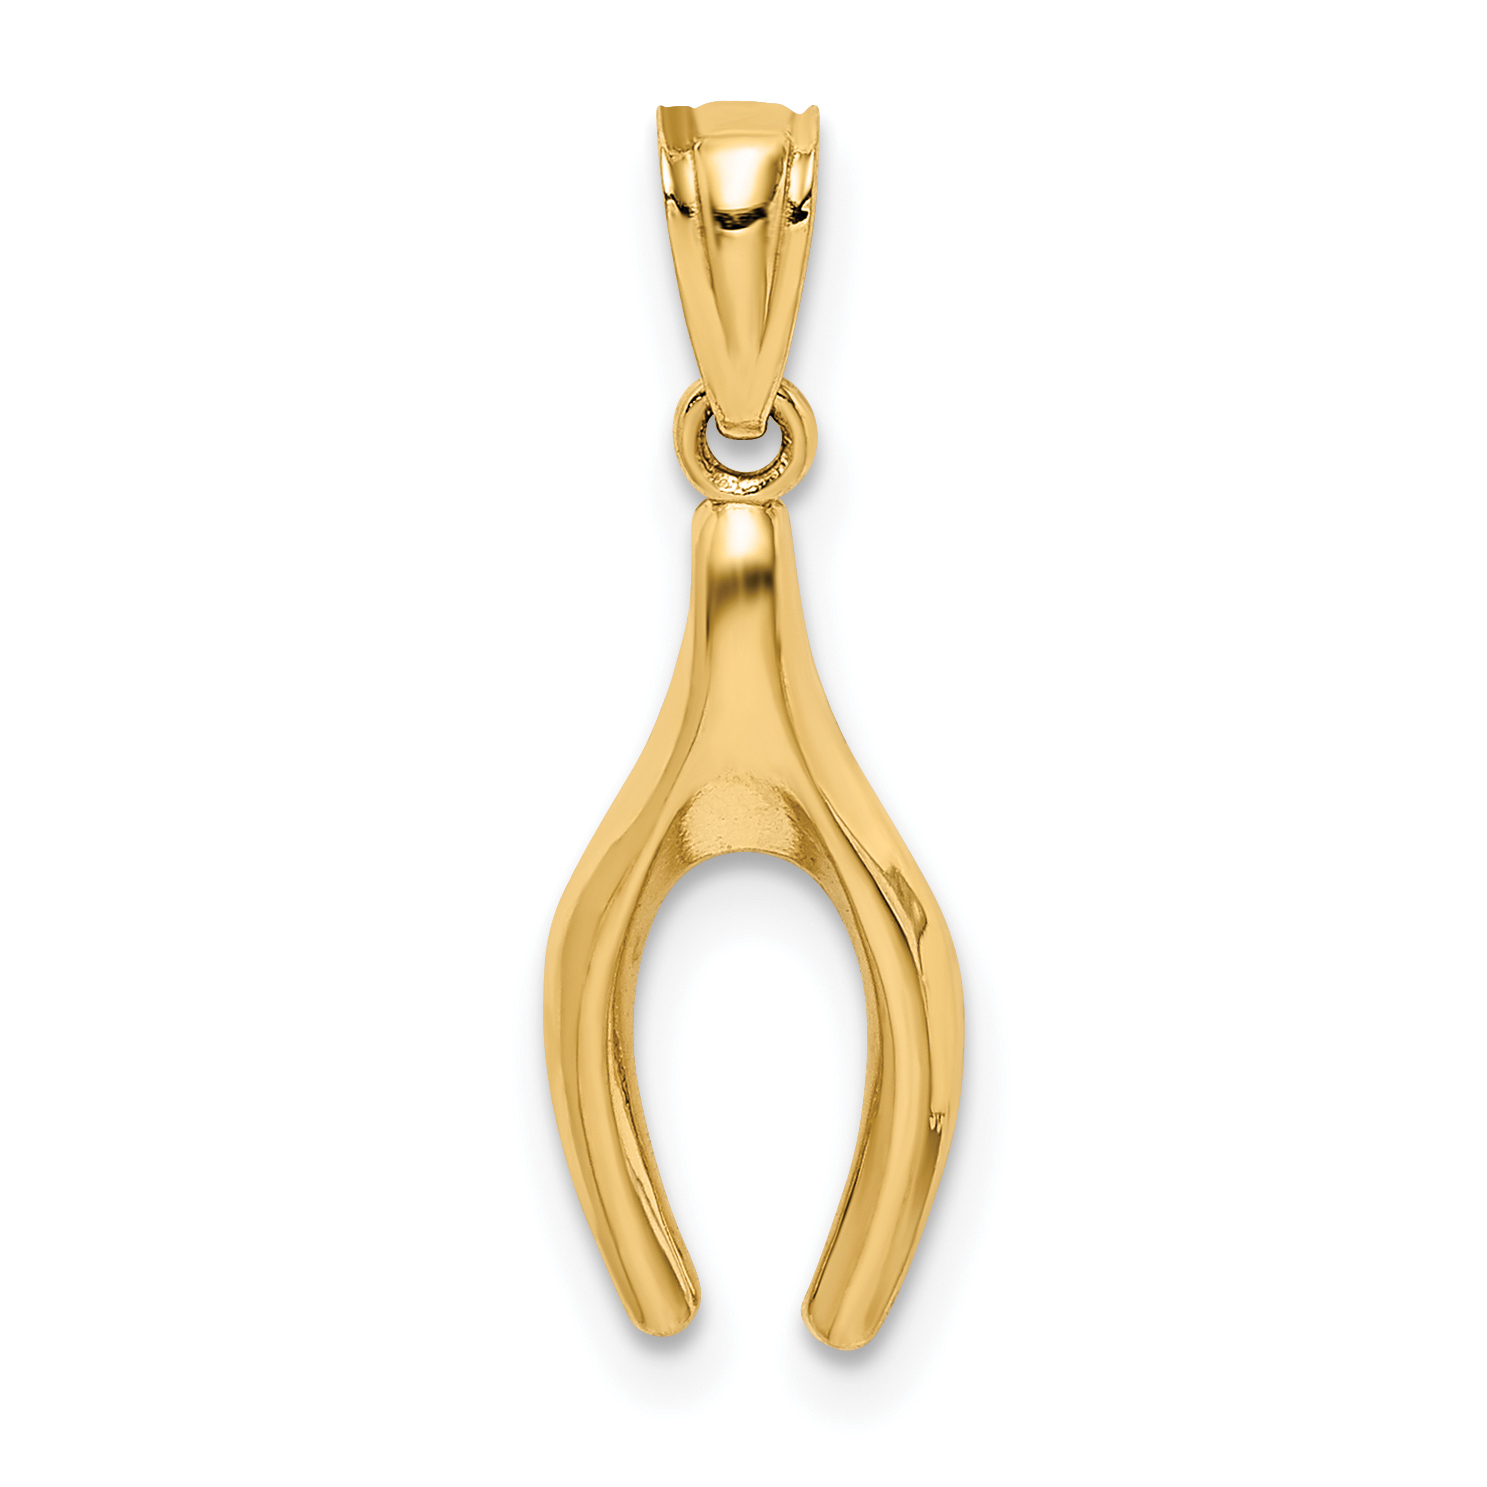 14k Yellow Gold Wish Bone Pendant Charm Necklace Good Luck Italian Horn Fine Jewelry For Women Gifts For Her - image 1 of 4